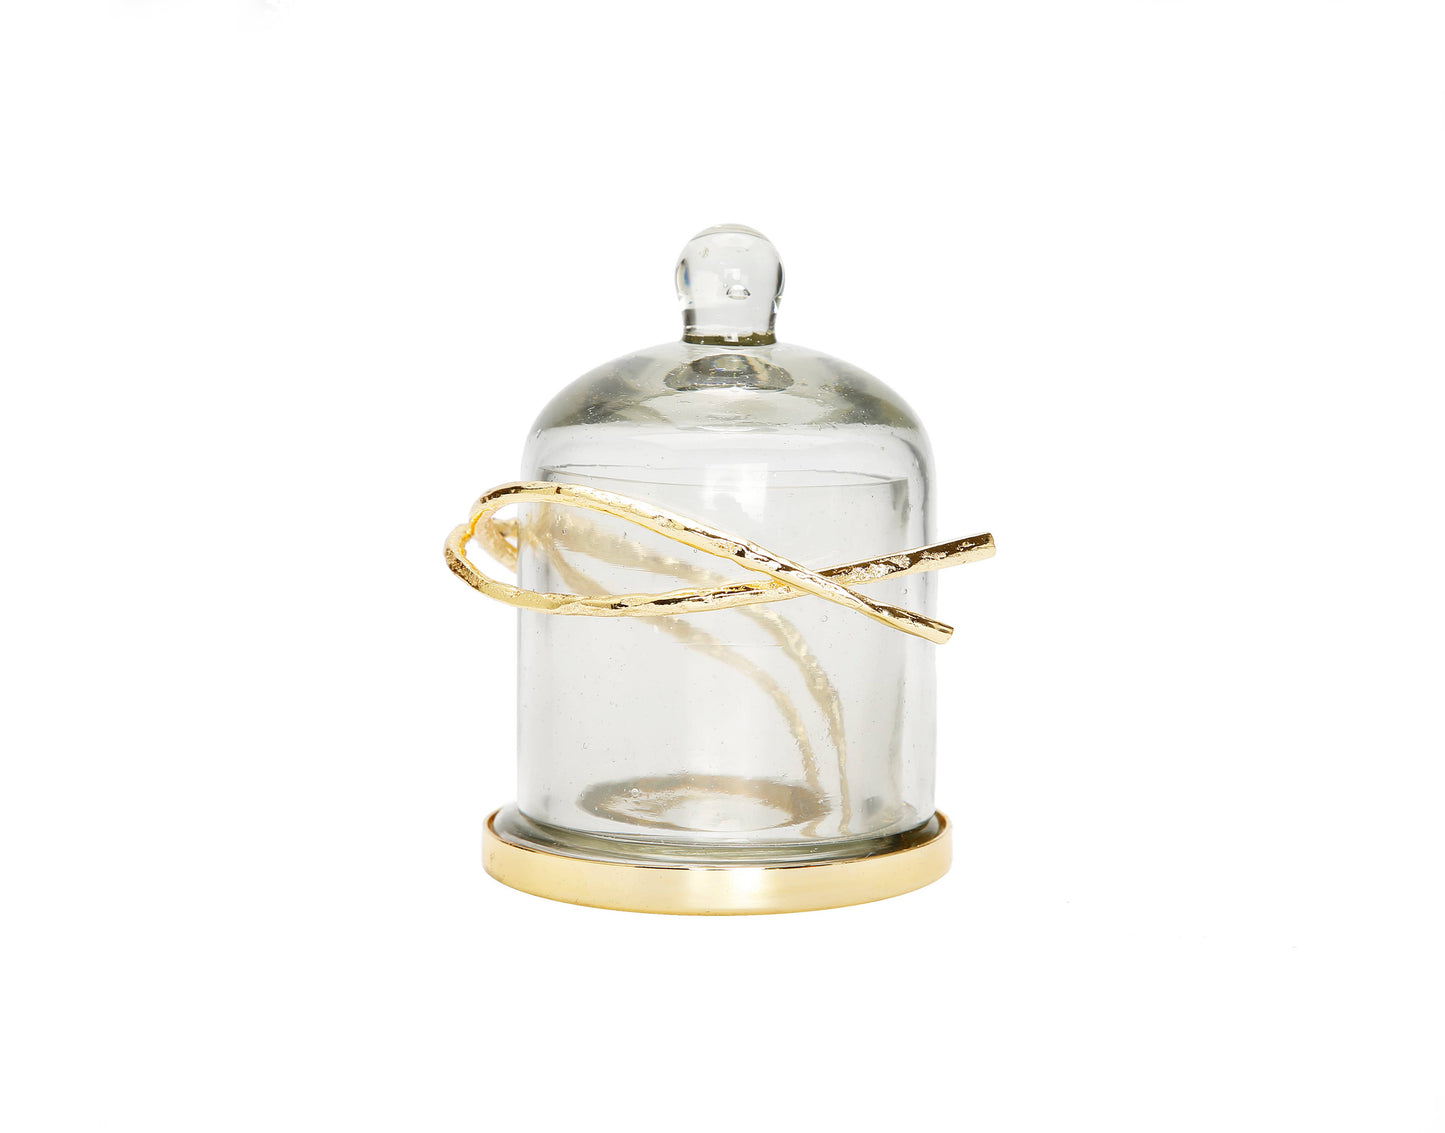 Glass Dome Match Holder with Gold Twig Design